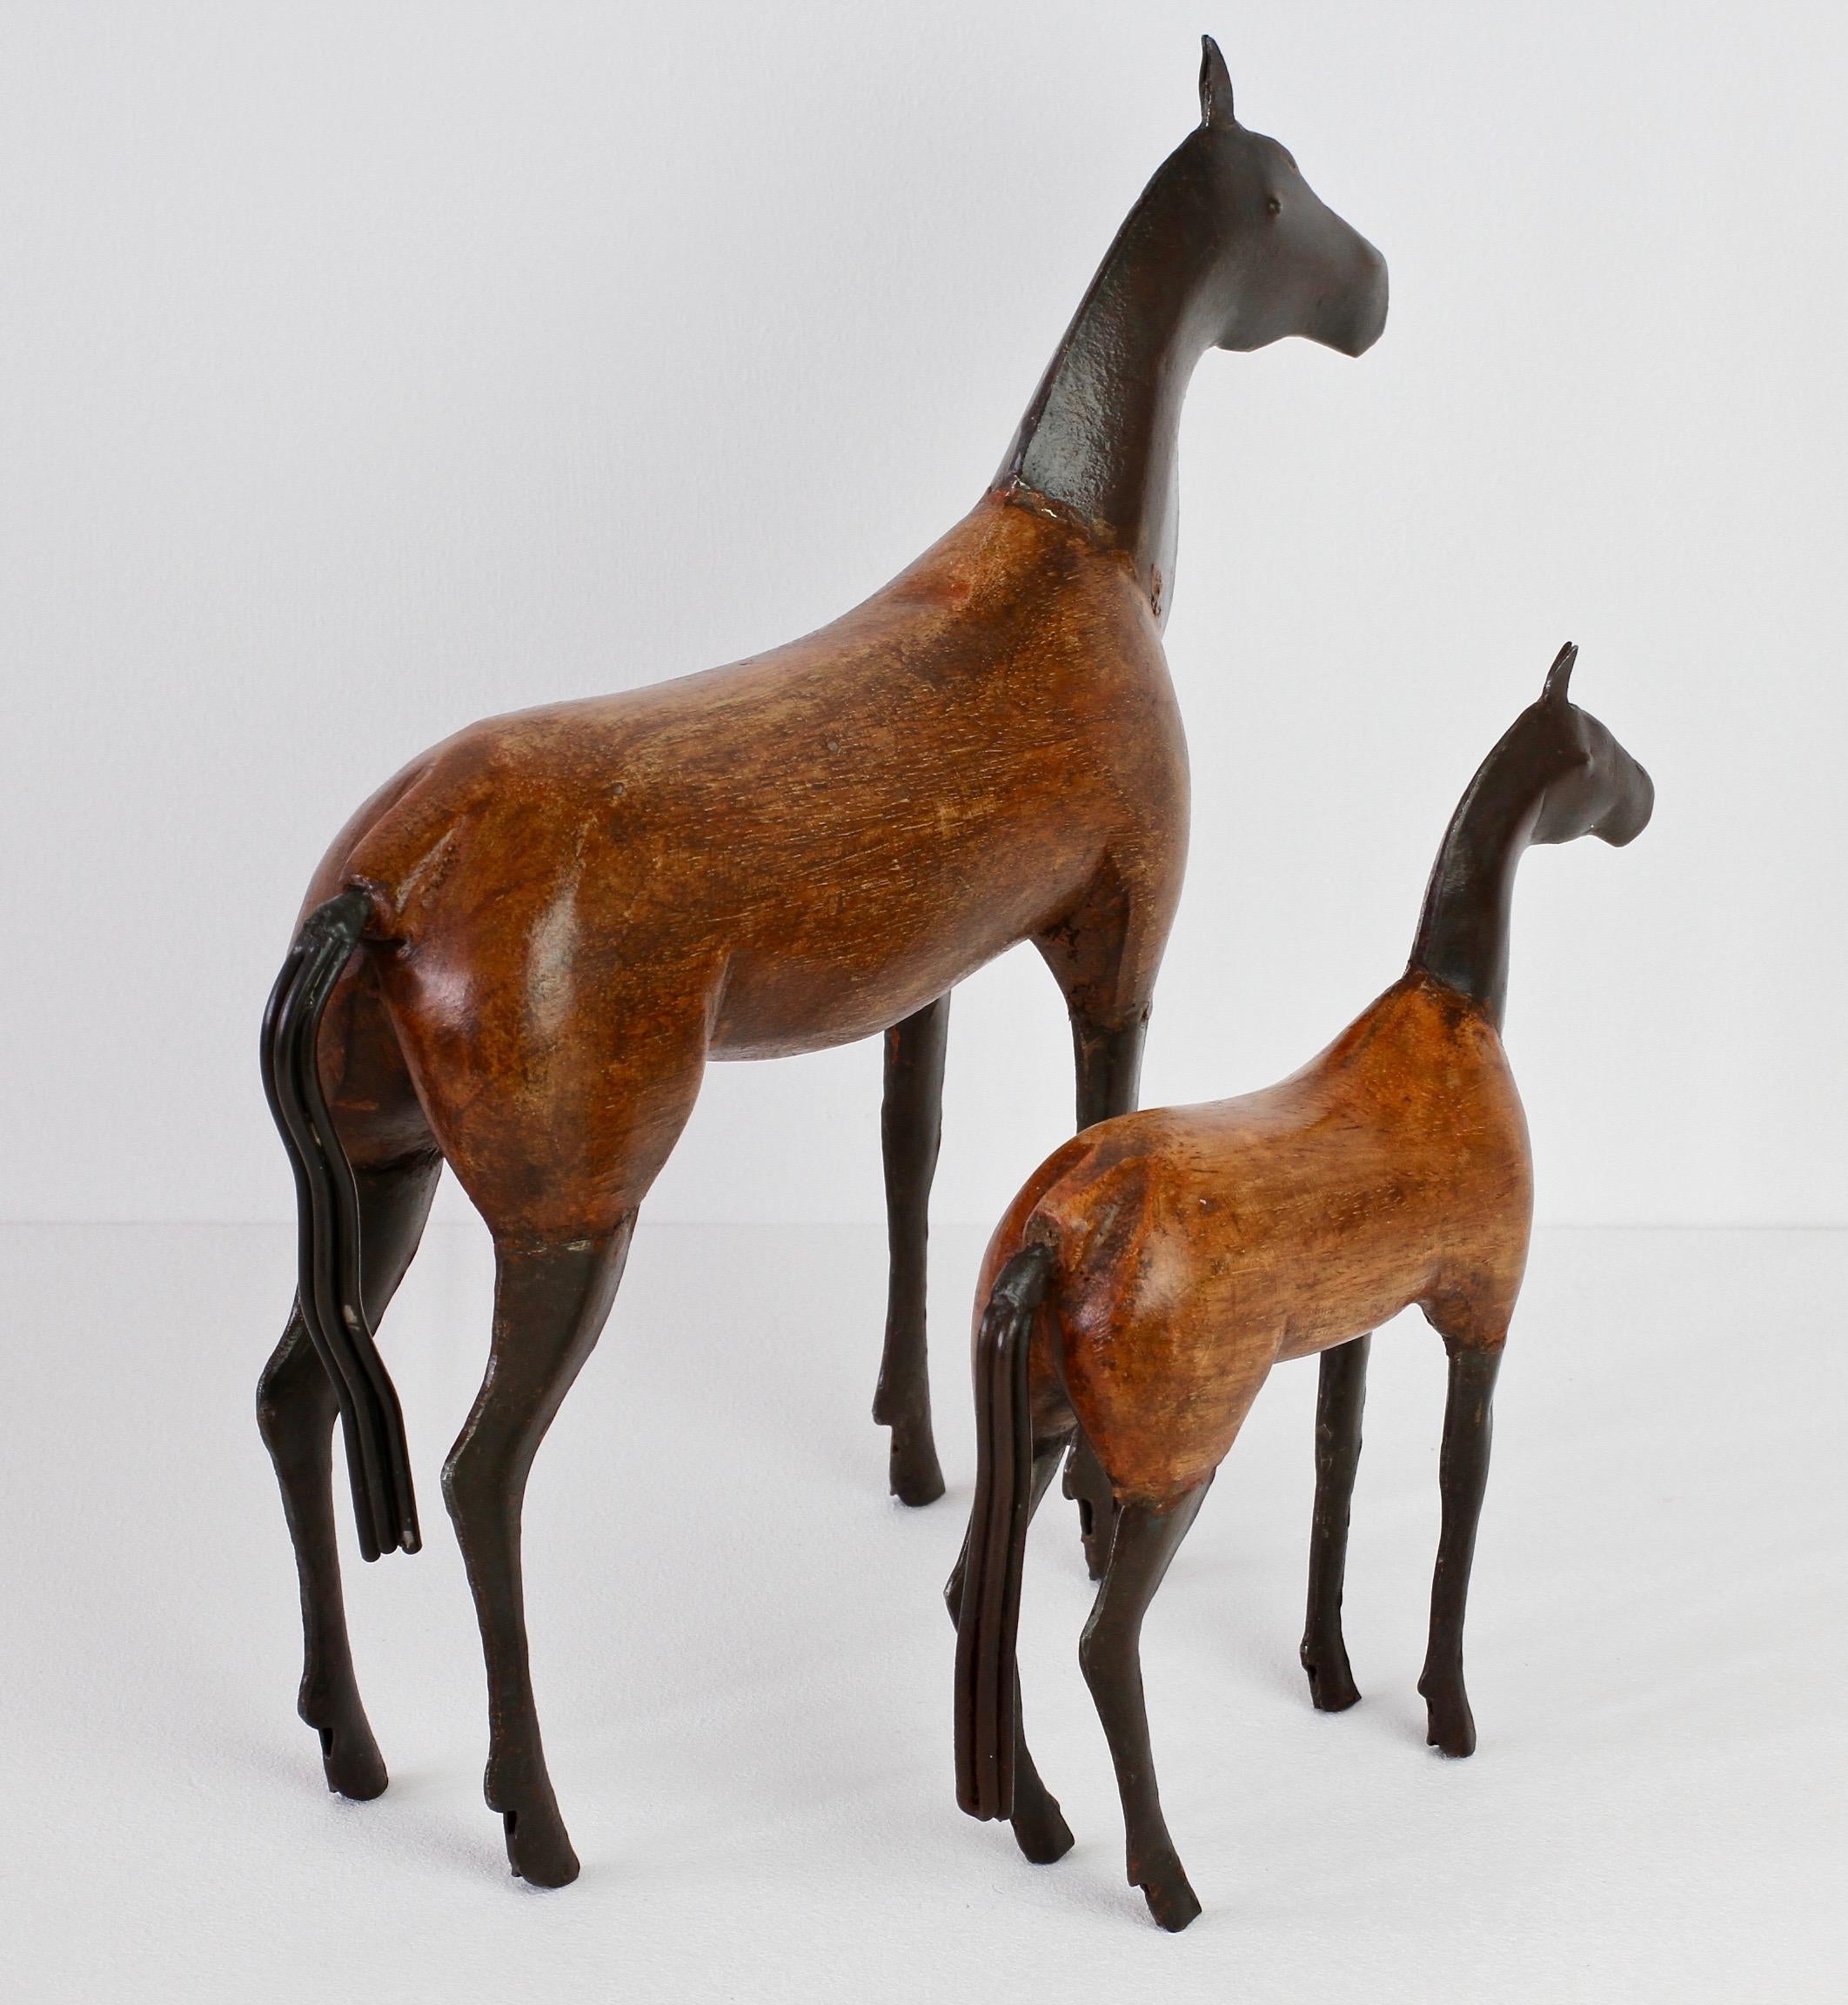 Pair of Vintage Hand-Carved Wooden and Metal Horse Sculptures, circa 1980s 1